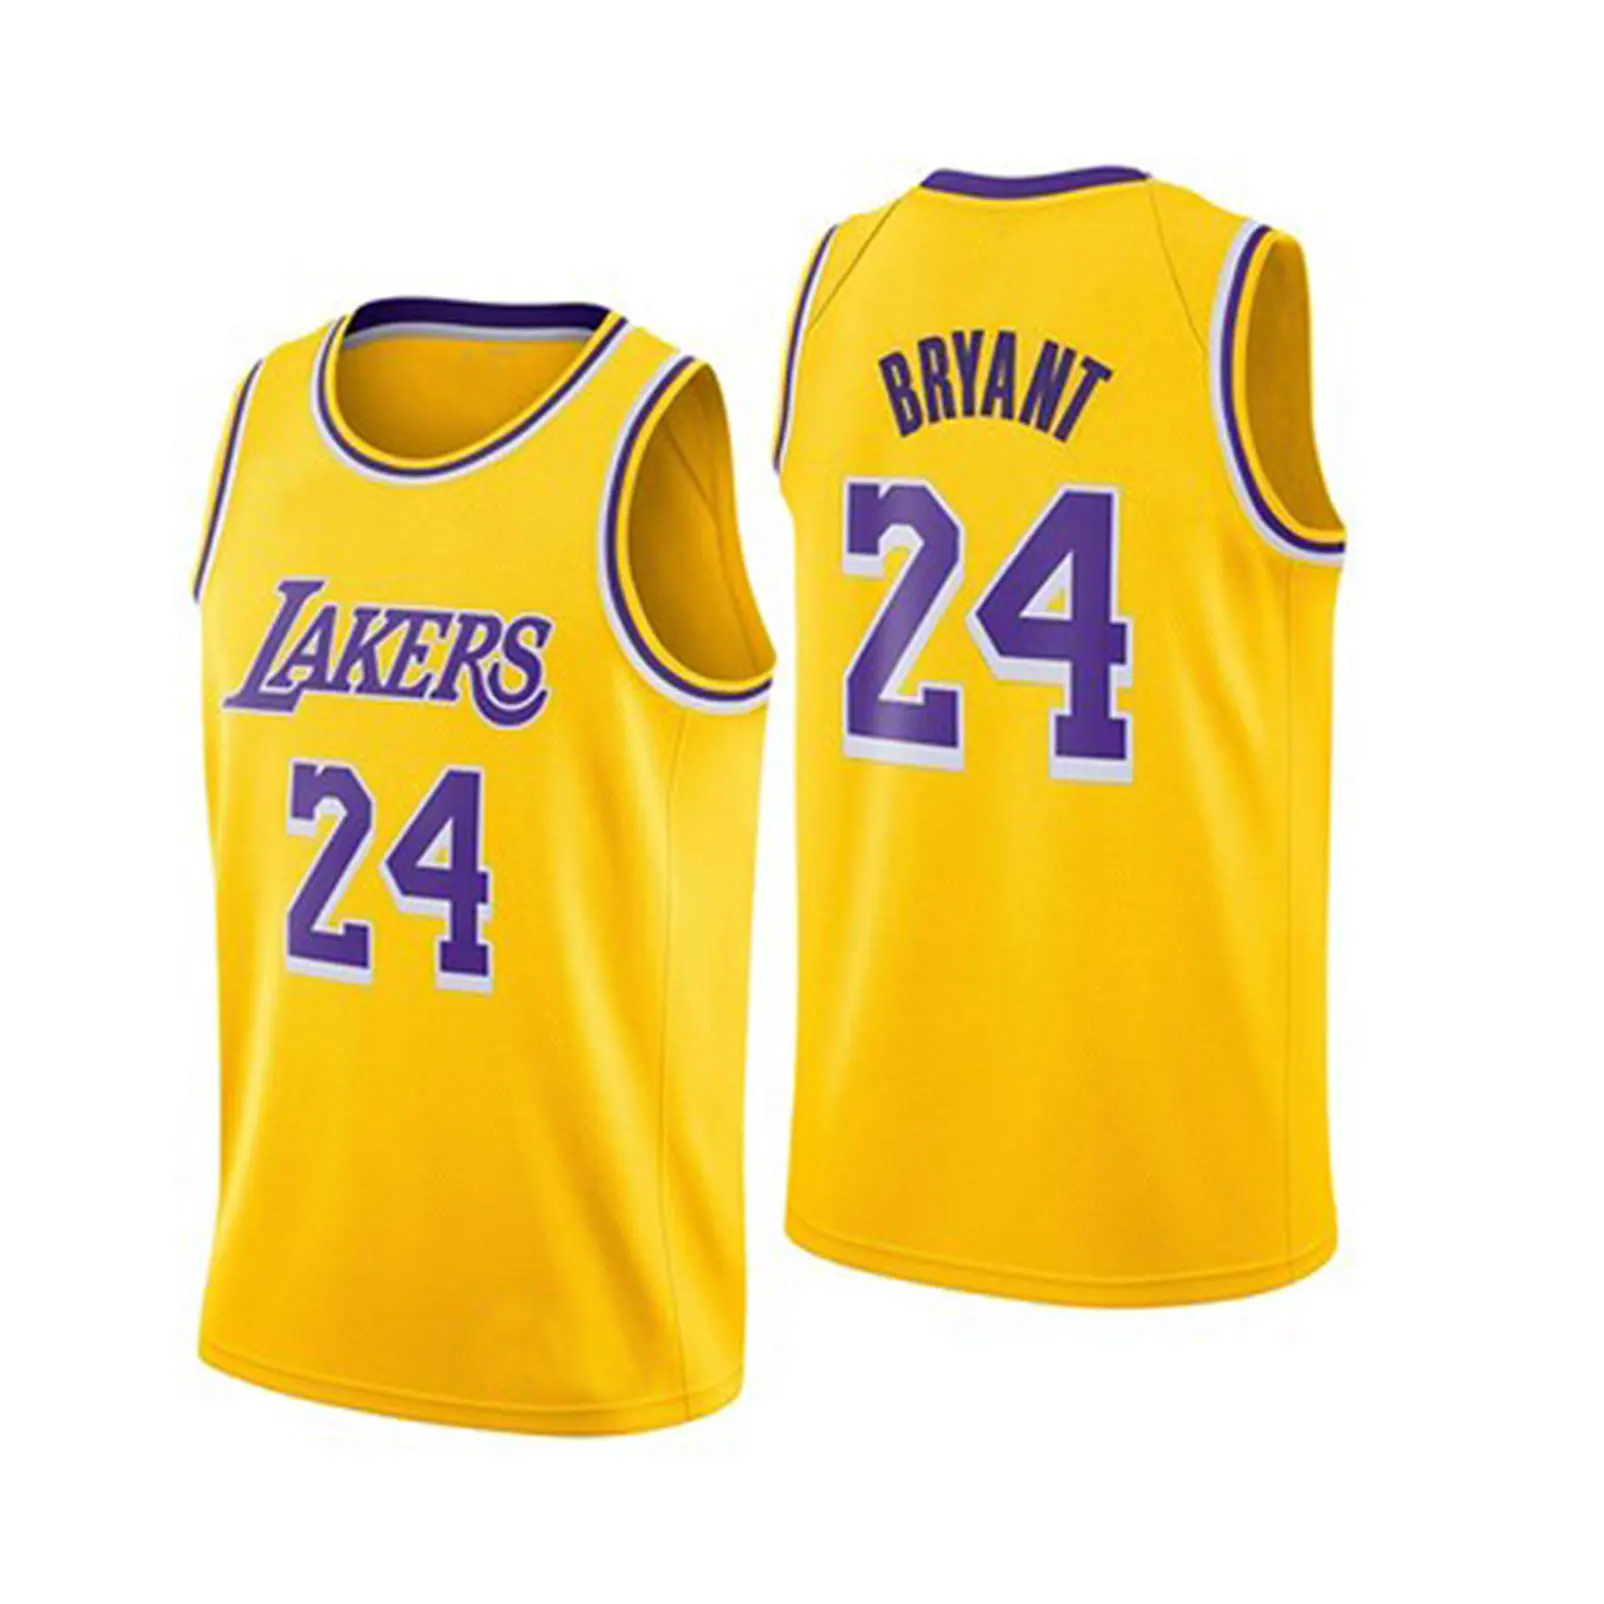 

Men'S Basketball Jersey Bryant # 24 #23 #30 #13 #77 #41 #34 #11#2 Player Tank Tops Kb Curry James Harden Sports T-Shirt